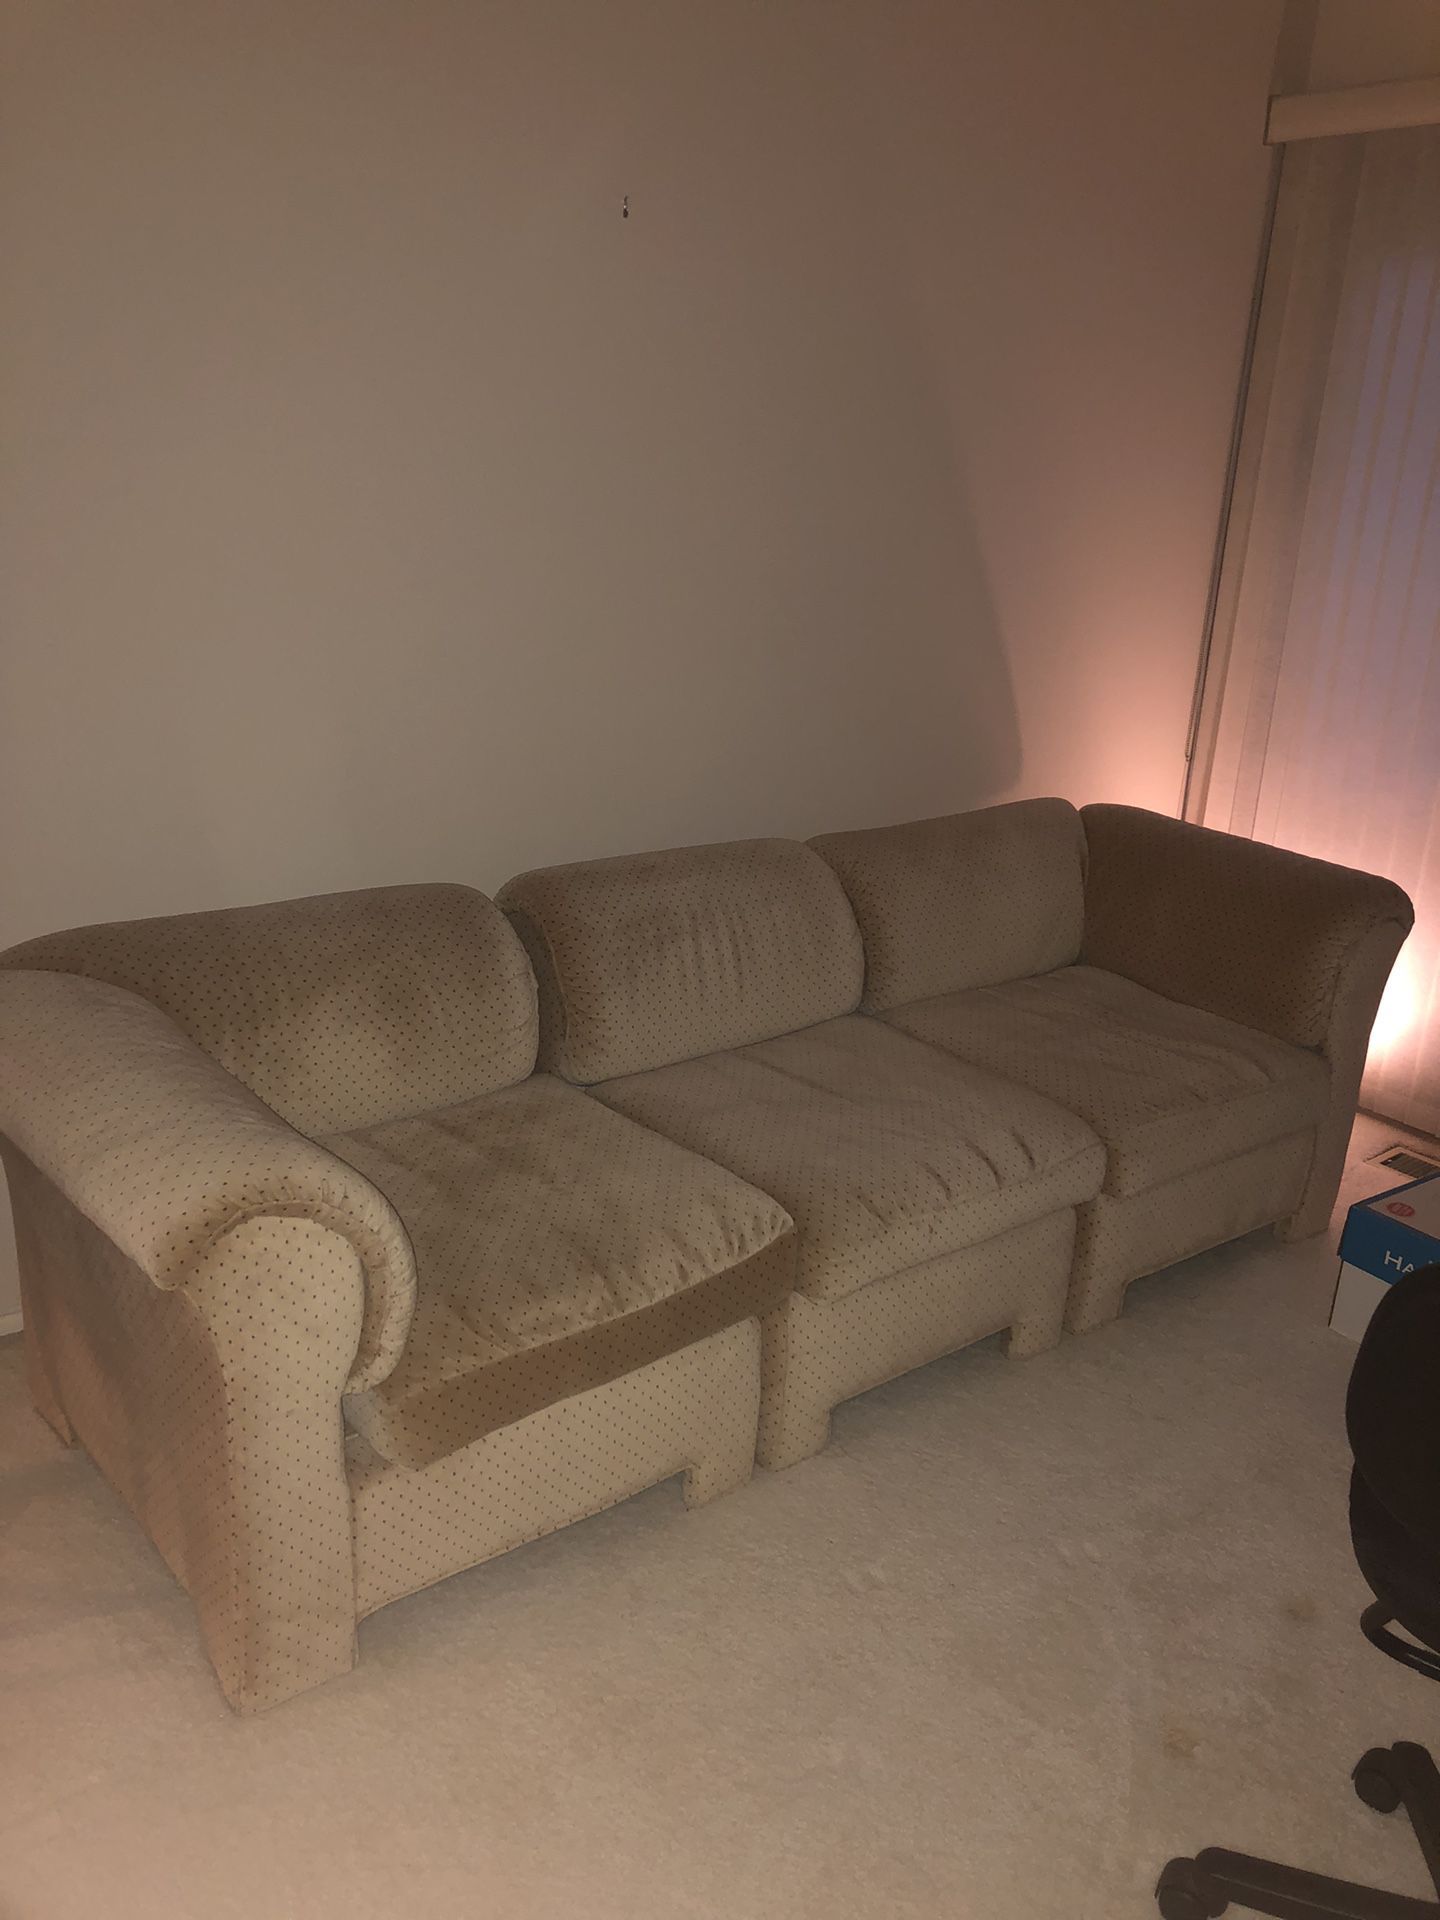 Living Room Couch And 4 Chairs